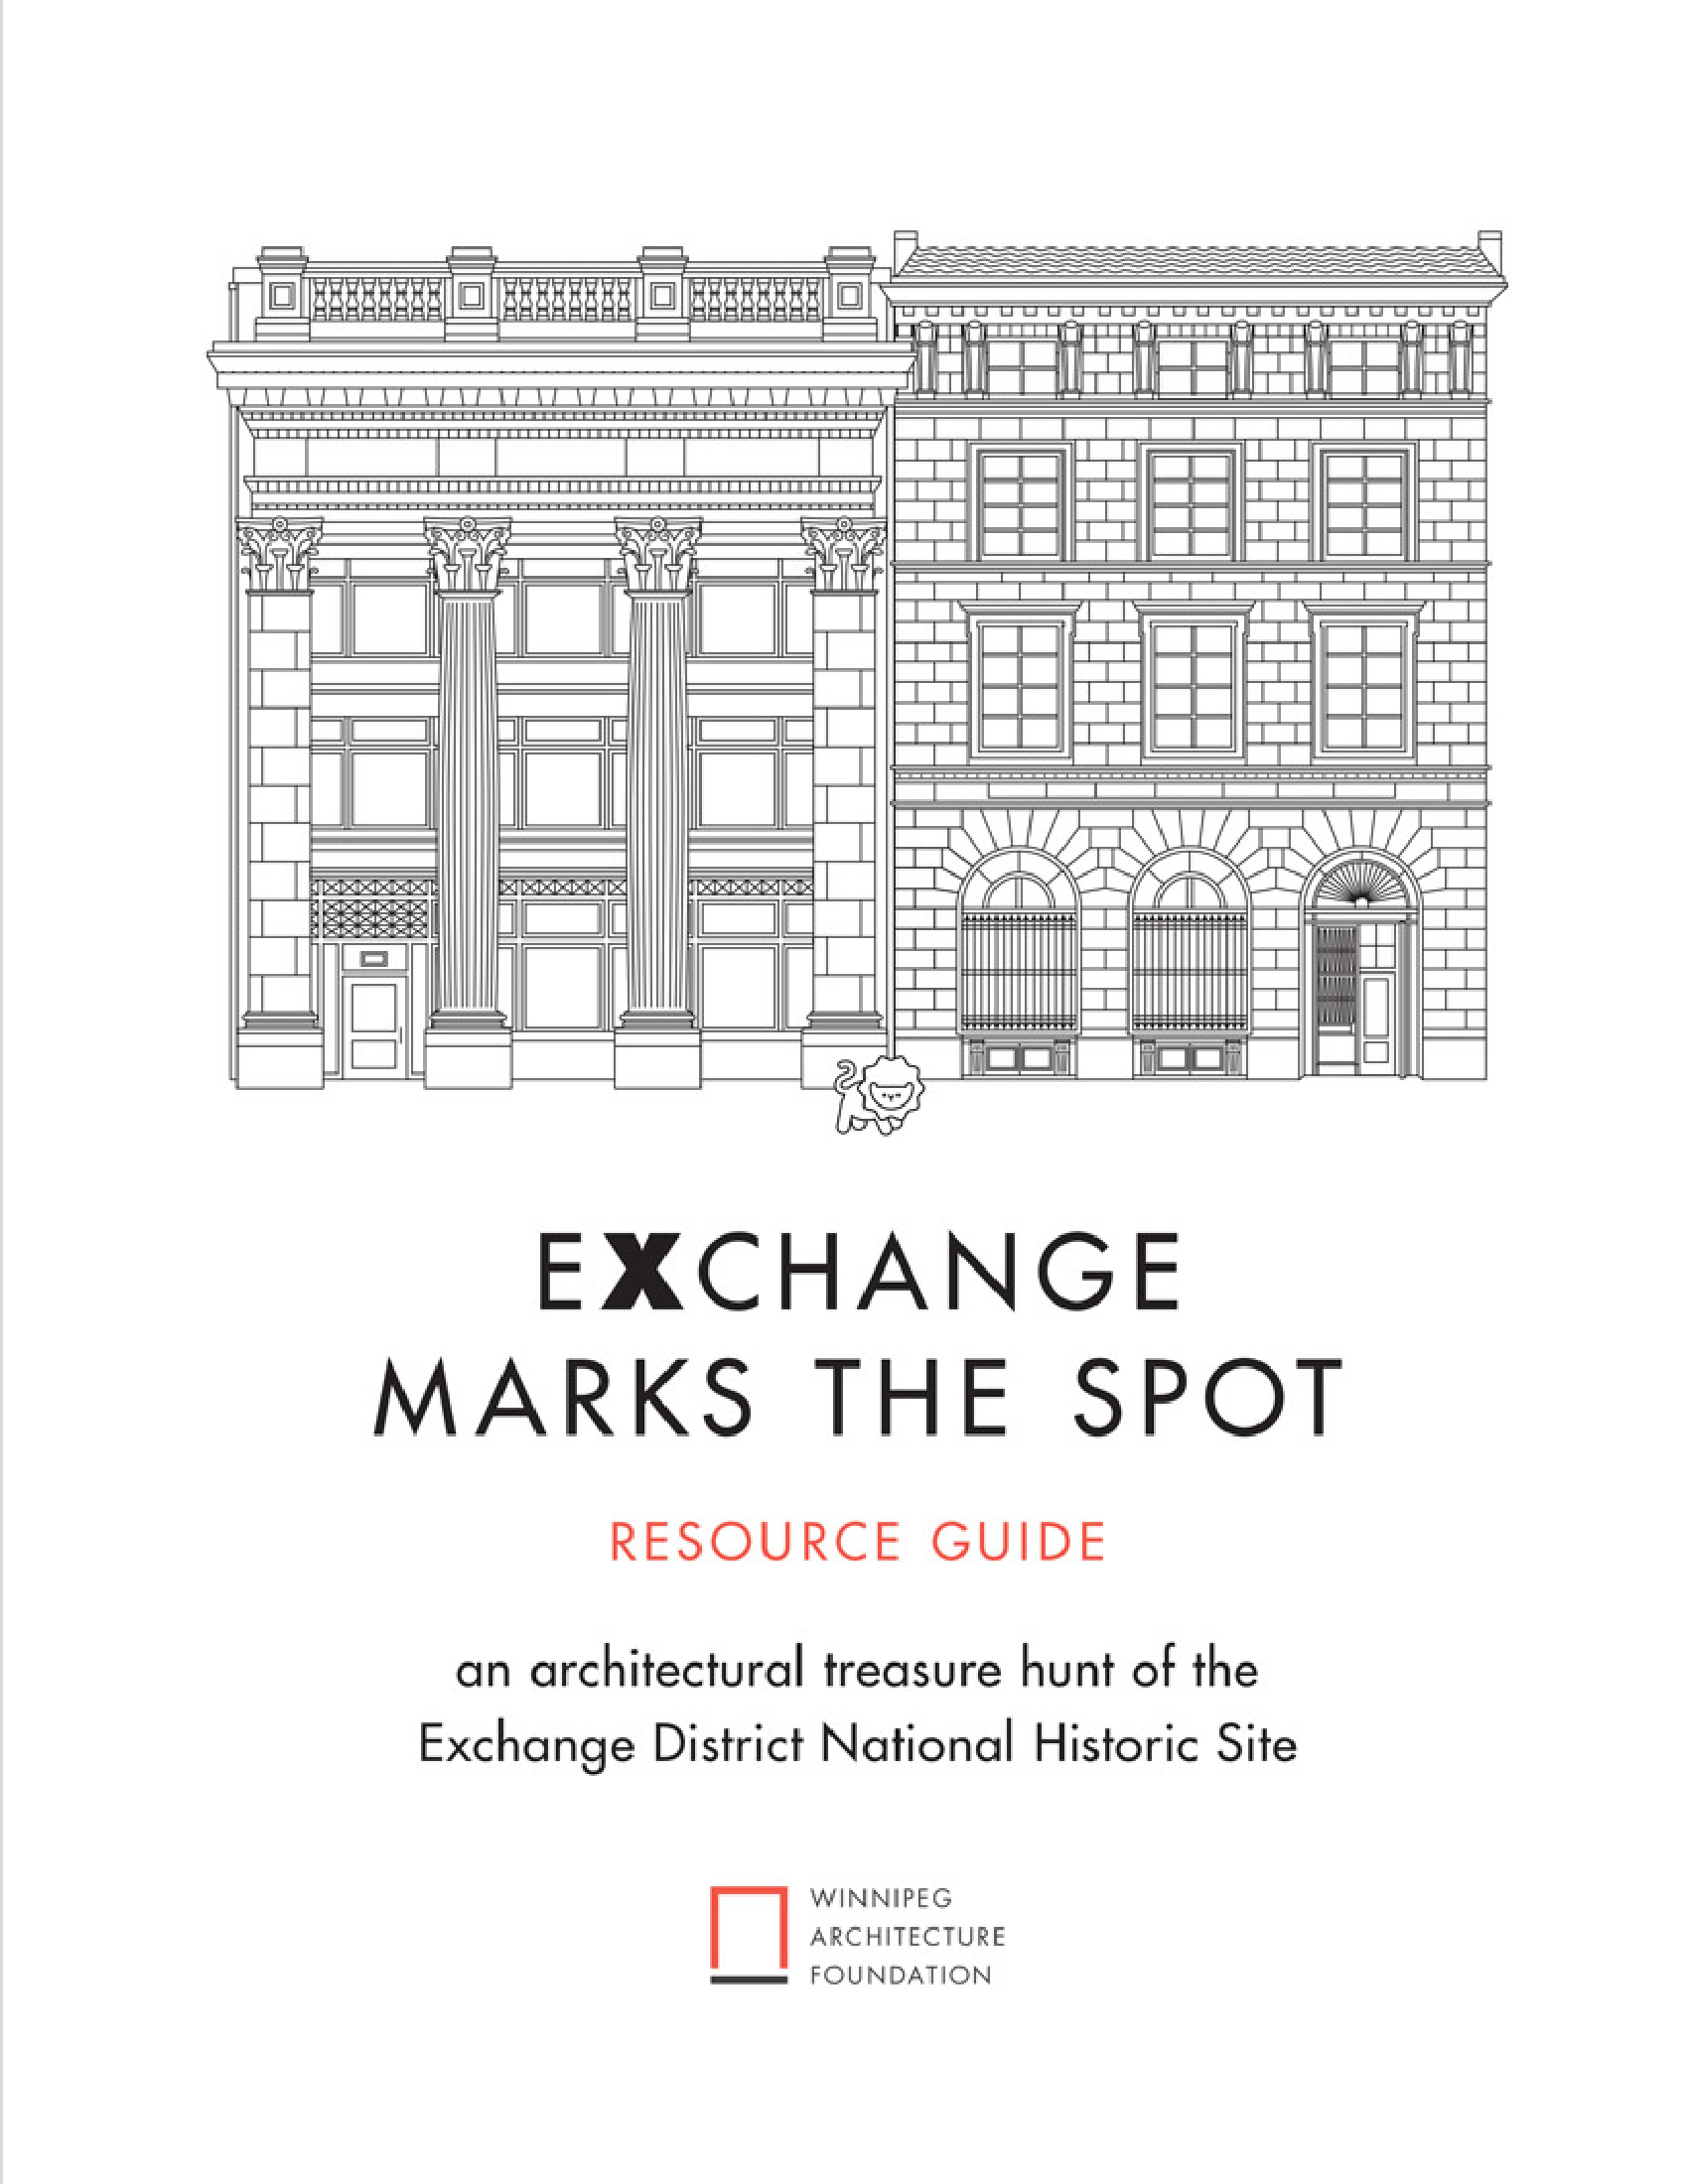 Exchange Marks the Spot (Resource Guide)